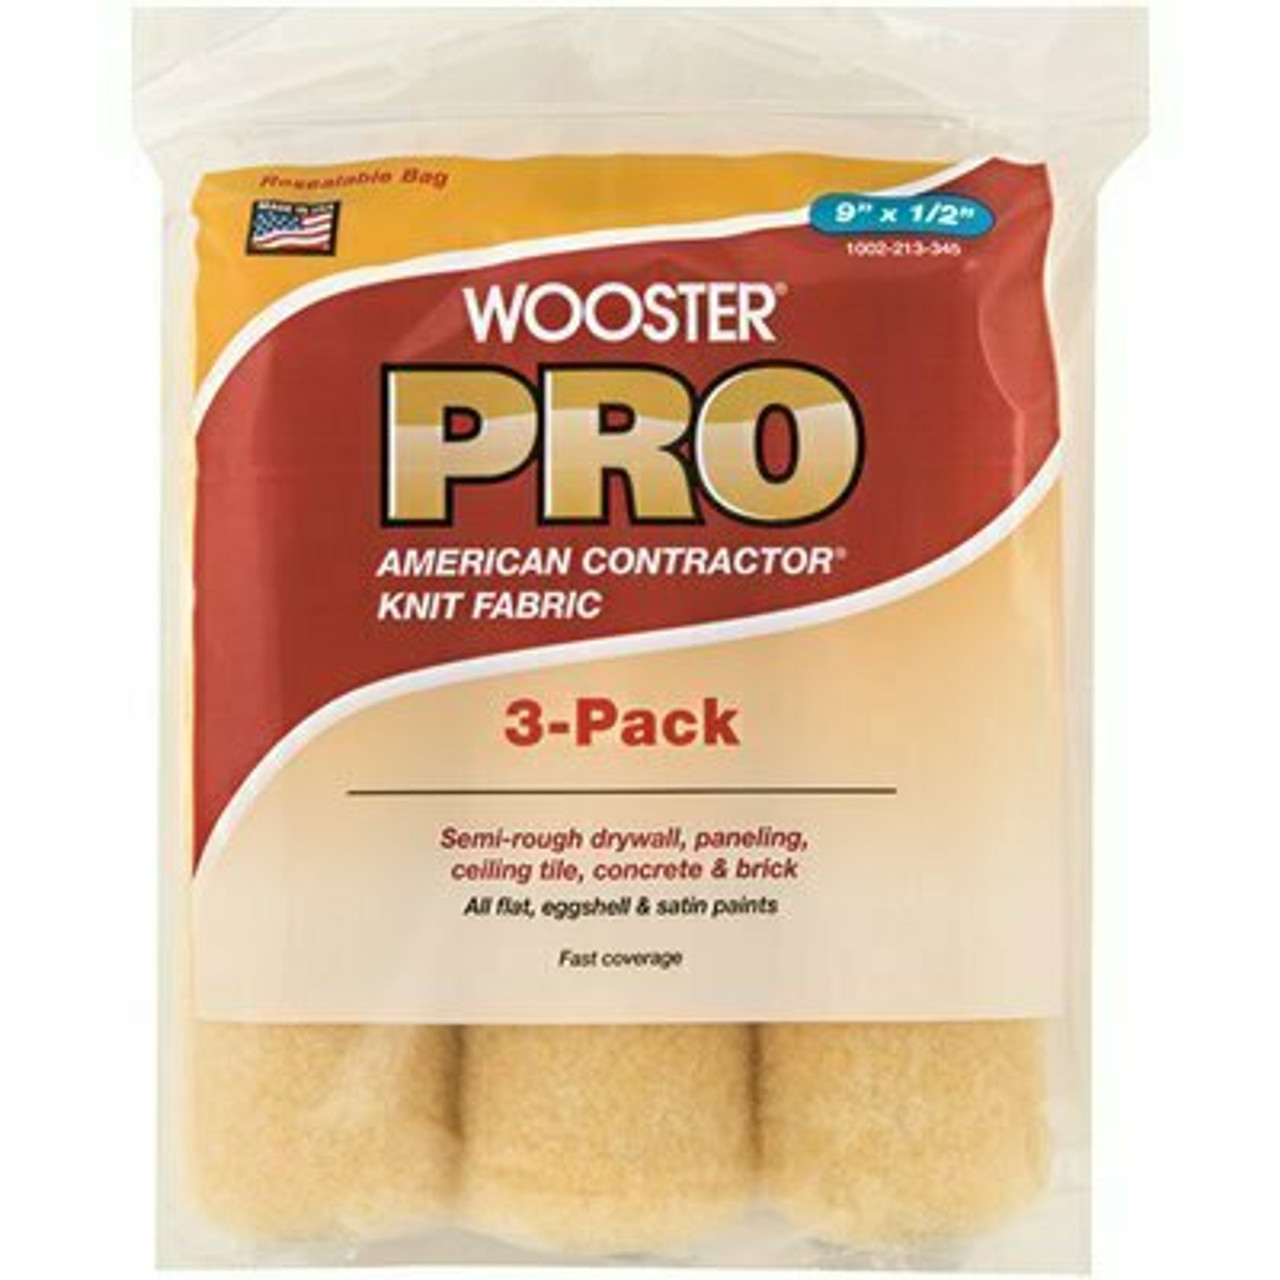 Wooster 9 In. X 1/2 In. Pro American Contractor High-Density Knit Fabric Roller (3 Pack)